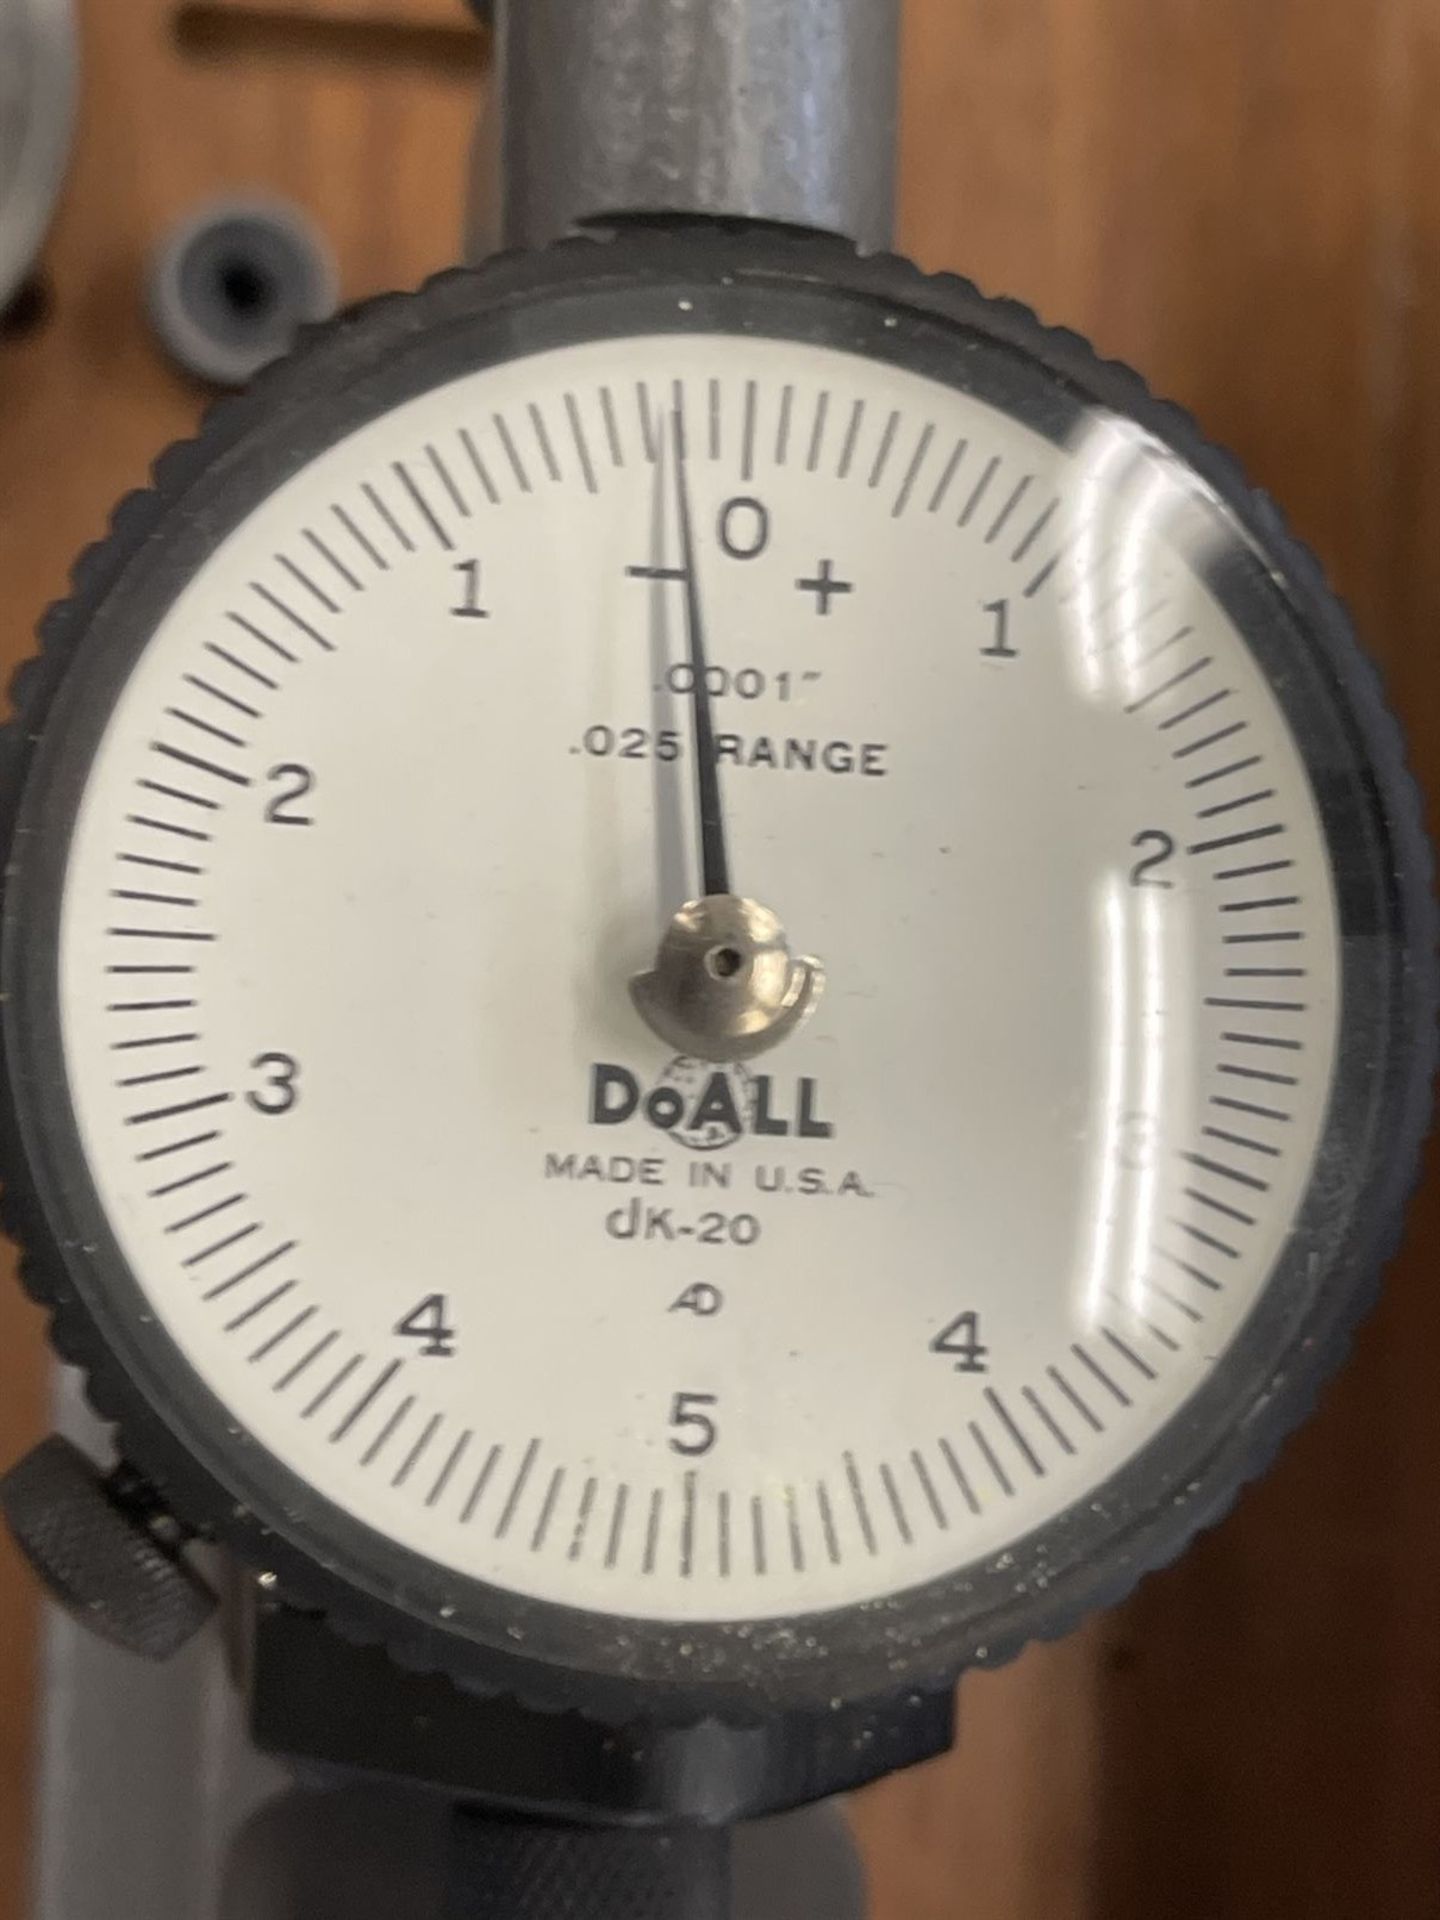 DoAll Micrometer Comparator - Image 3 of 3